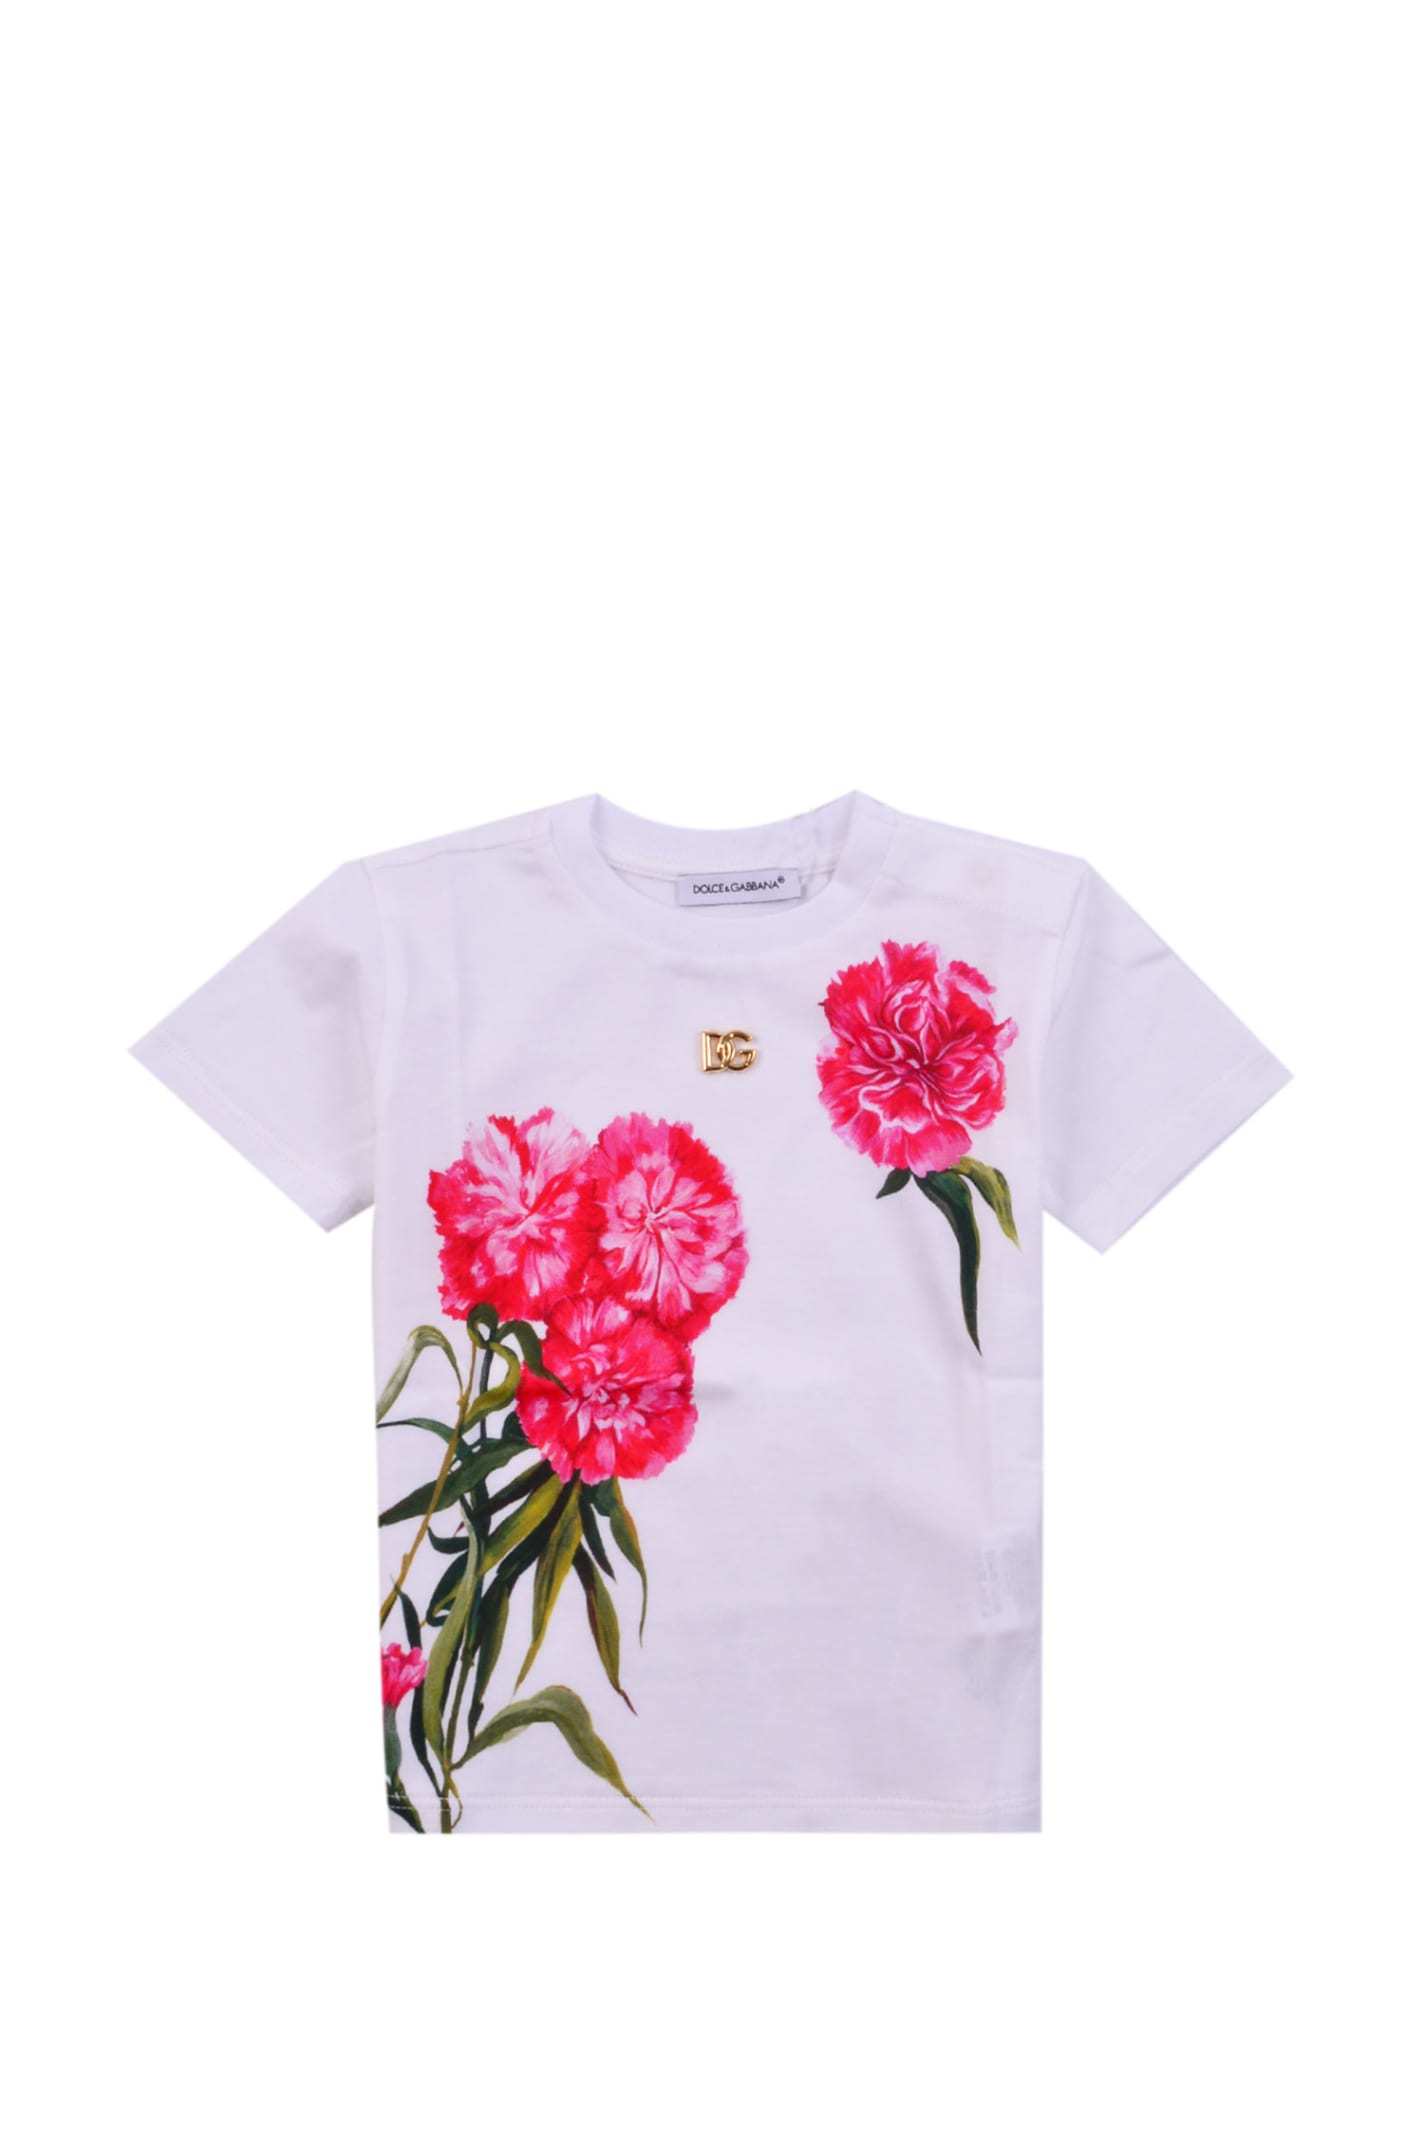 DOLCE & GABBANA T-SHIRT WITH CARNATIONS PRINT IN COTTON